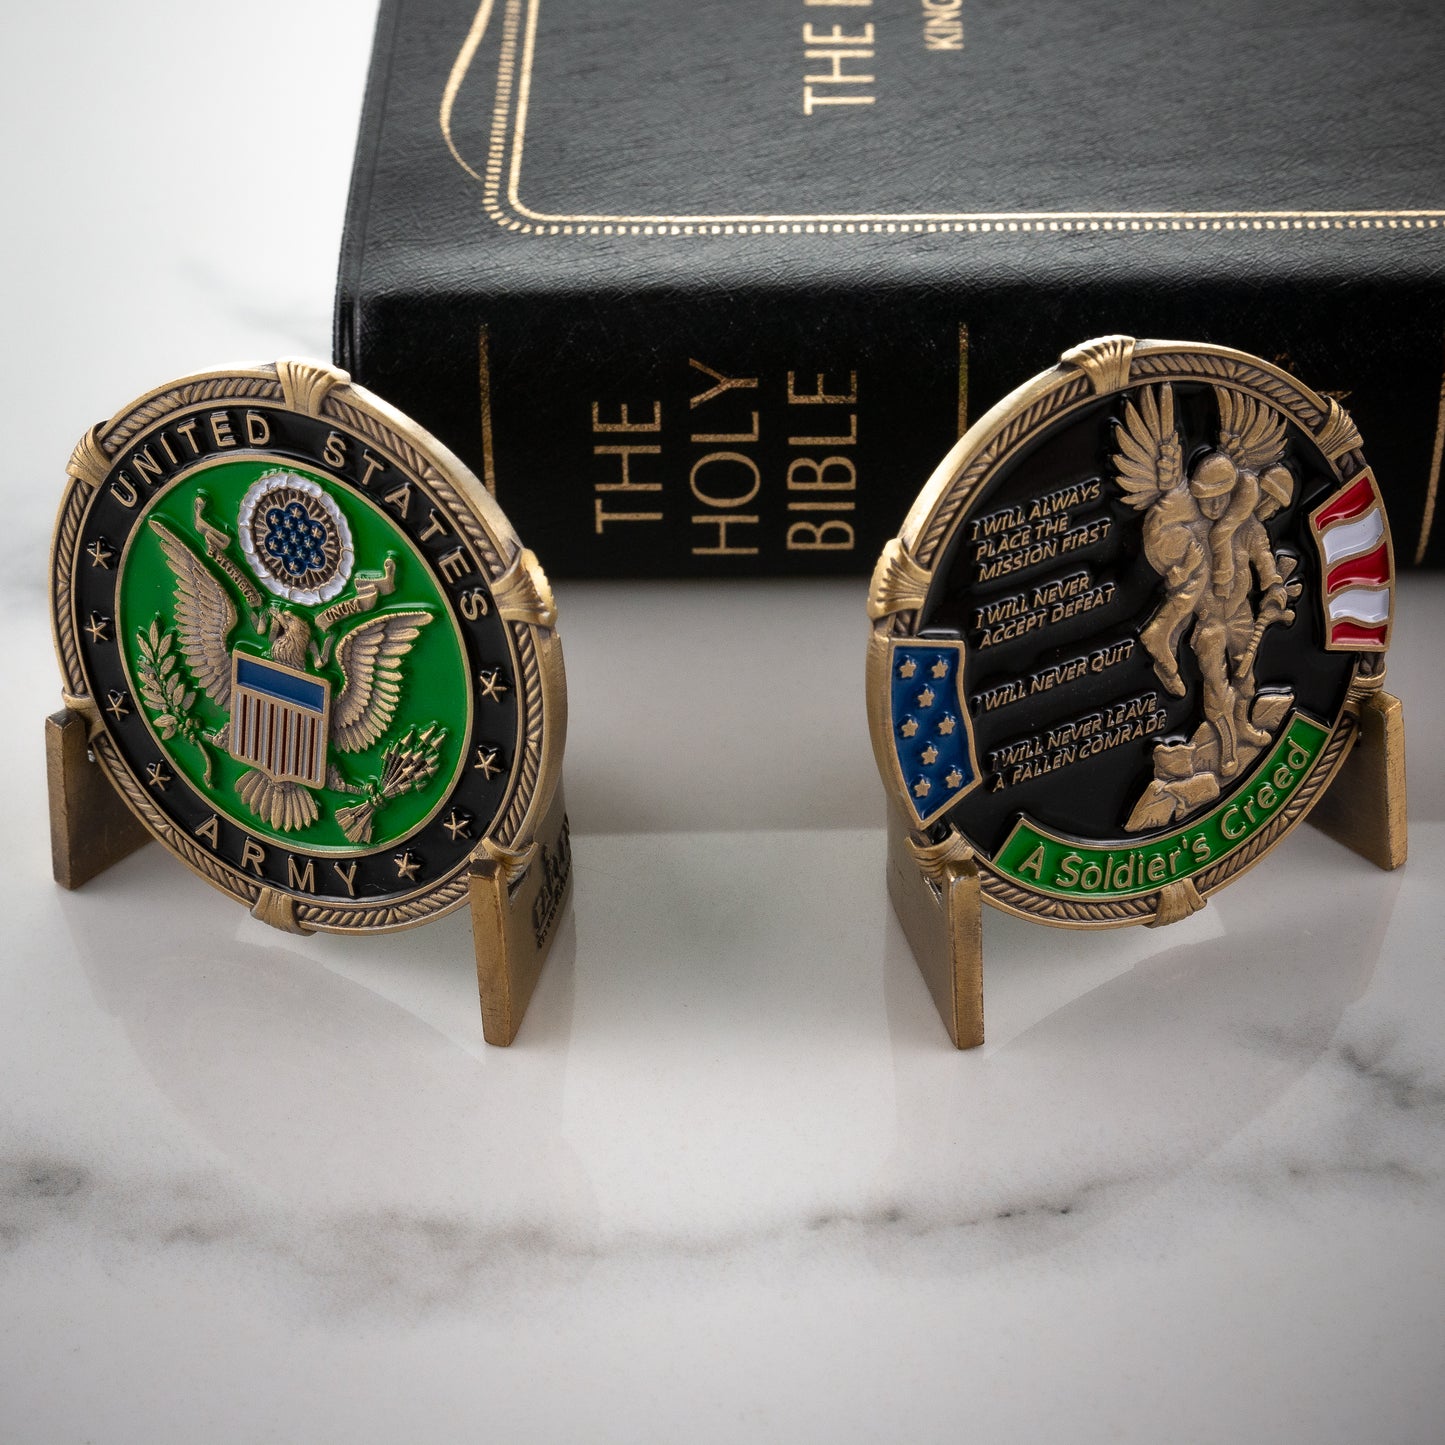 US Army Soldier’s Creed Coin